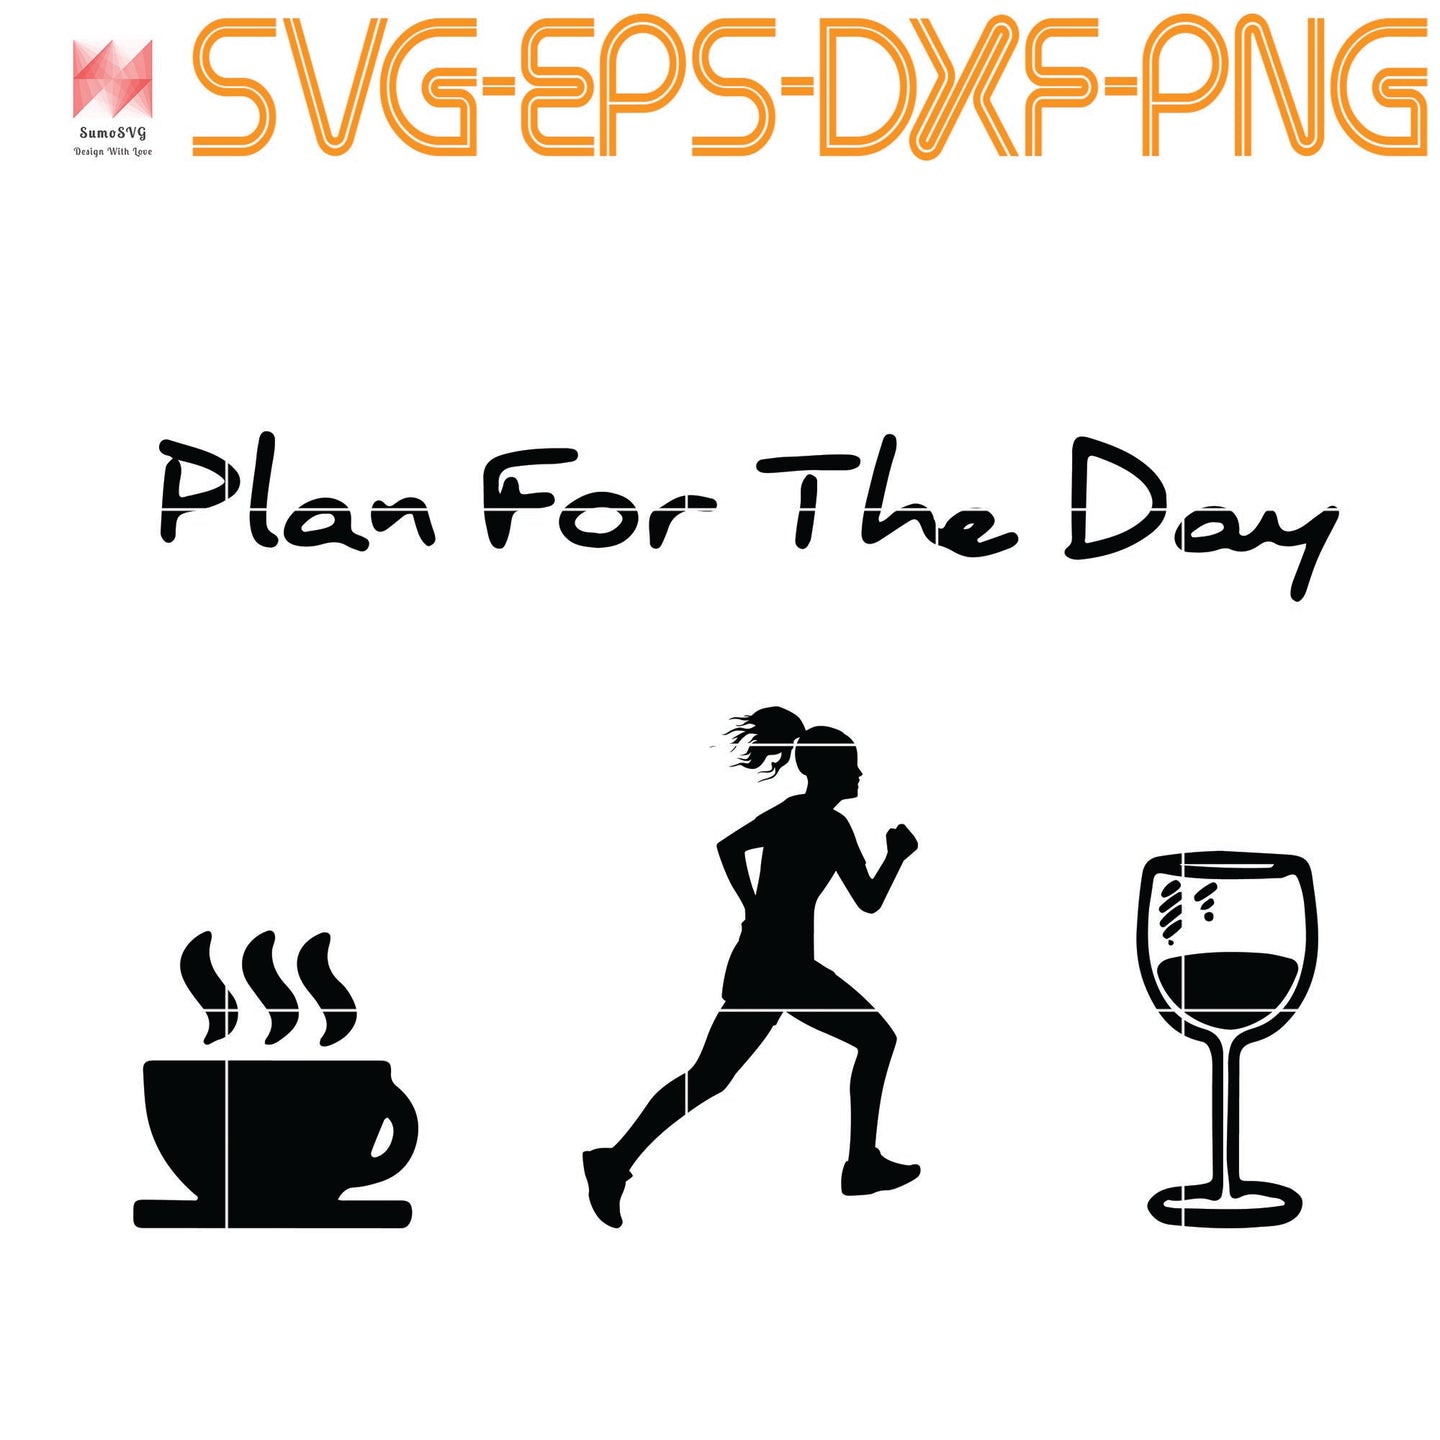 Download Plan For The Day Coffee Running Wine Womenplan For The Day Coffe Sumosvg